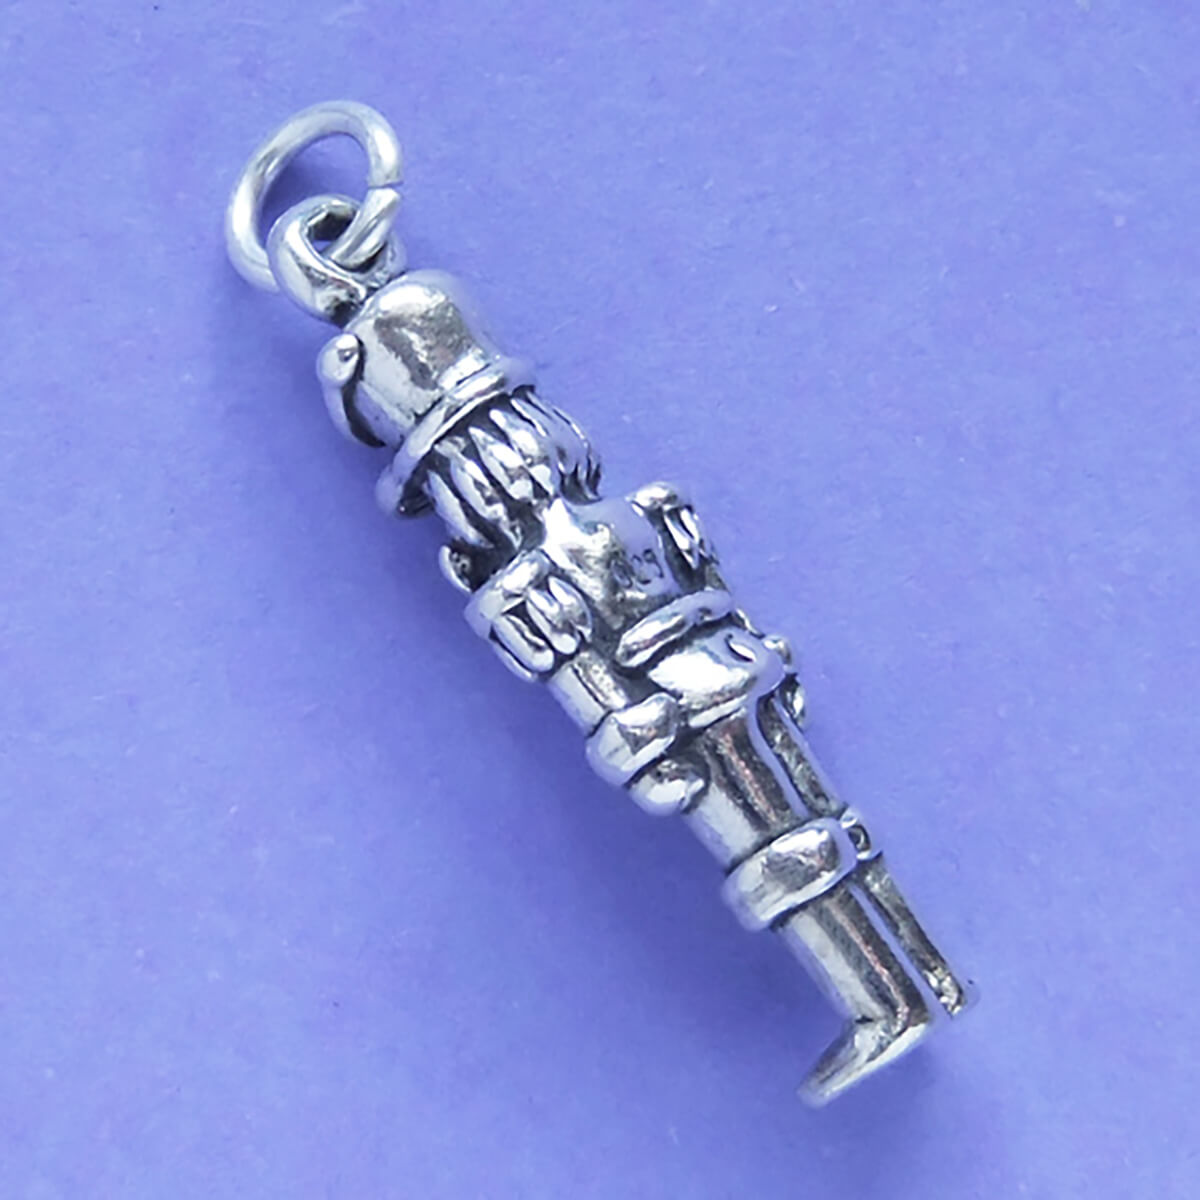 Nutcracker Toy Soldier Charm Sterling Silver Christmas Pendant